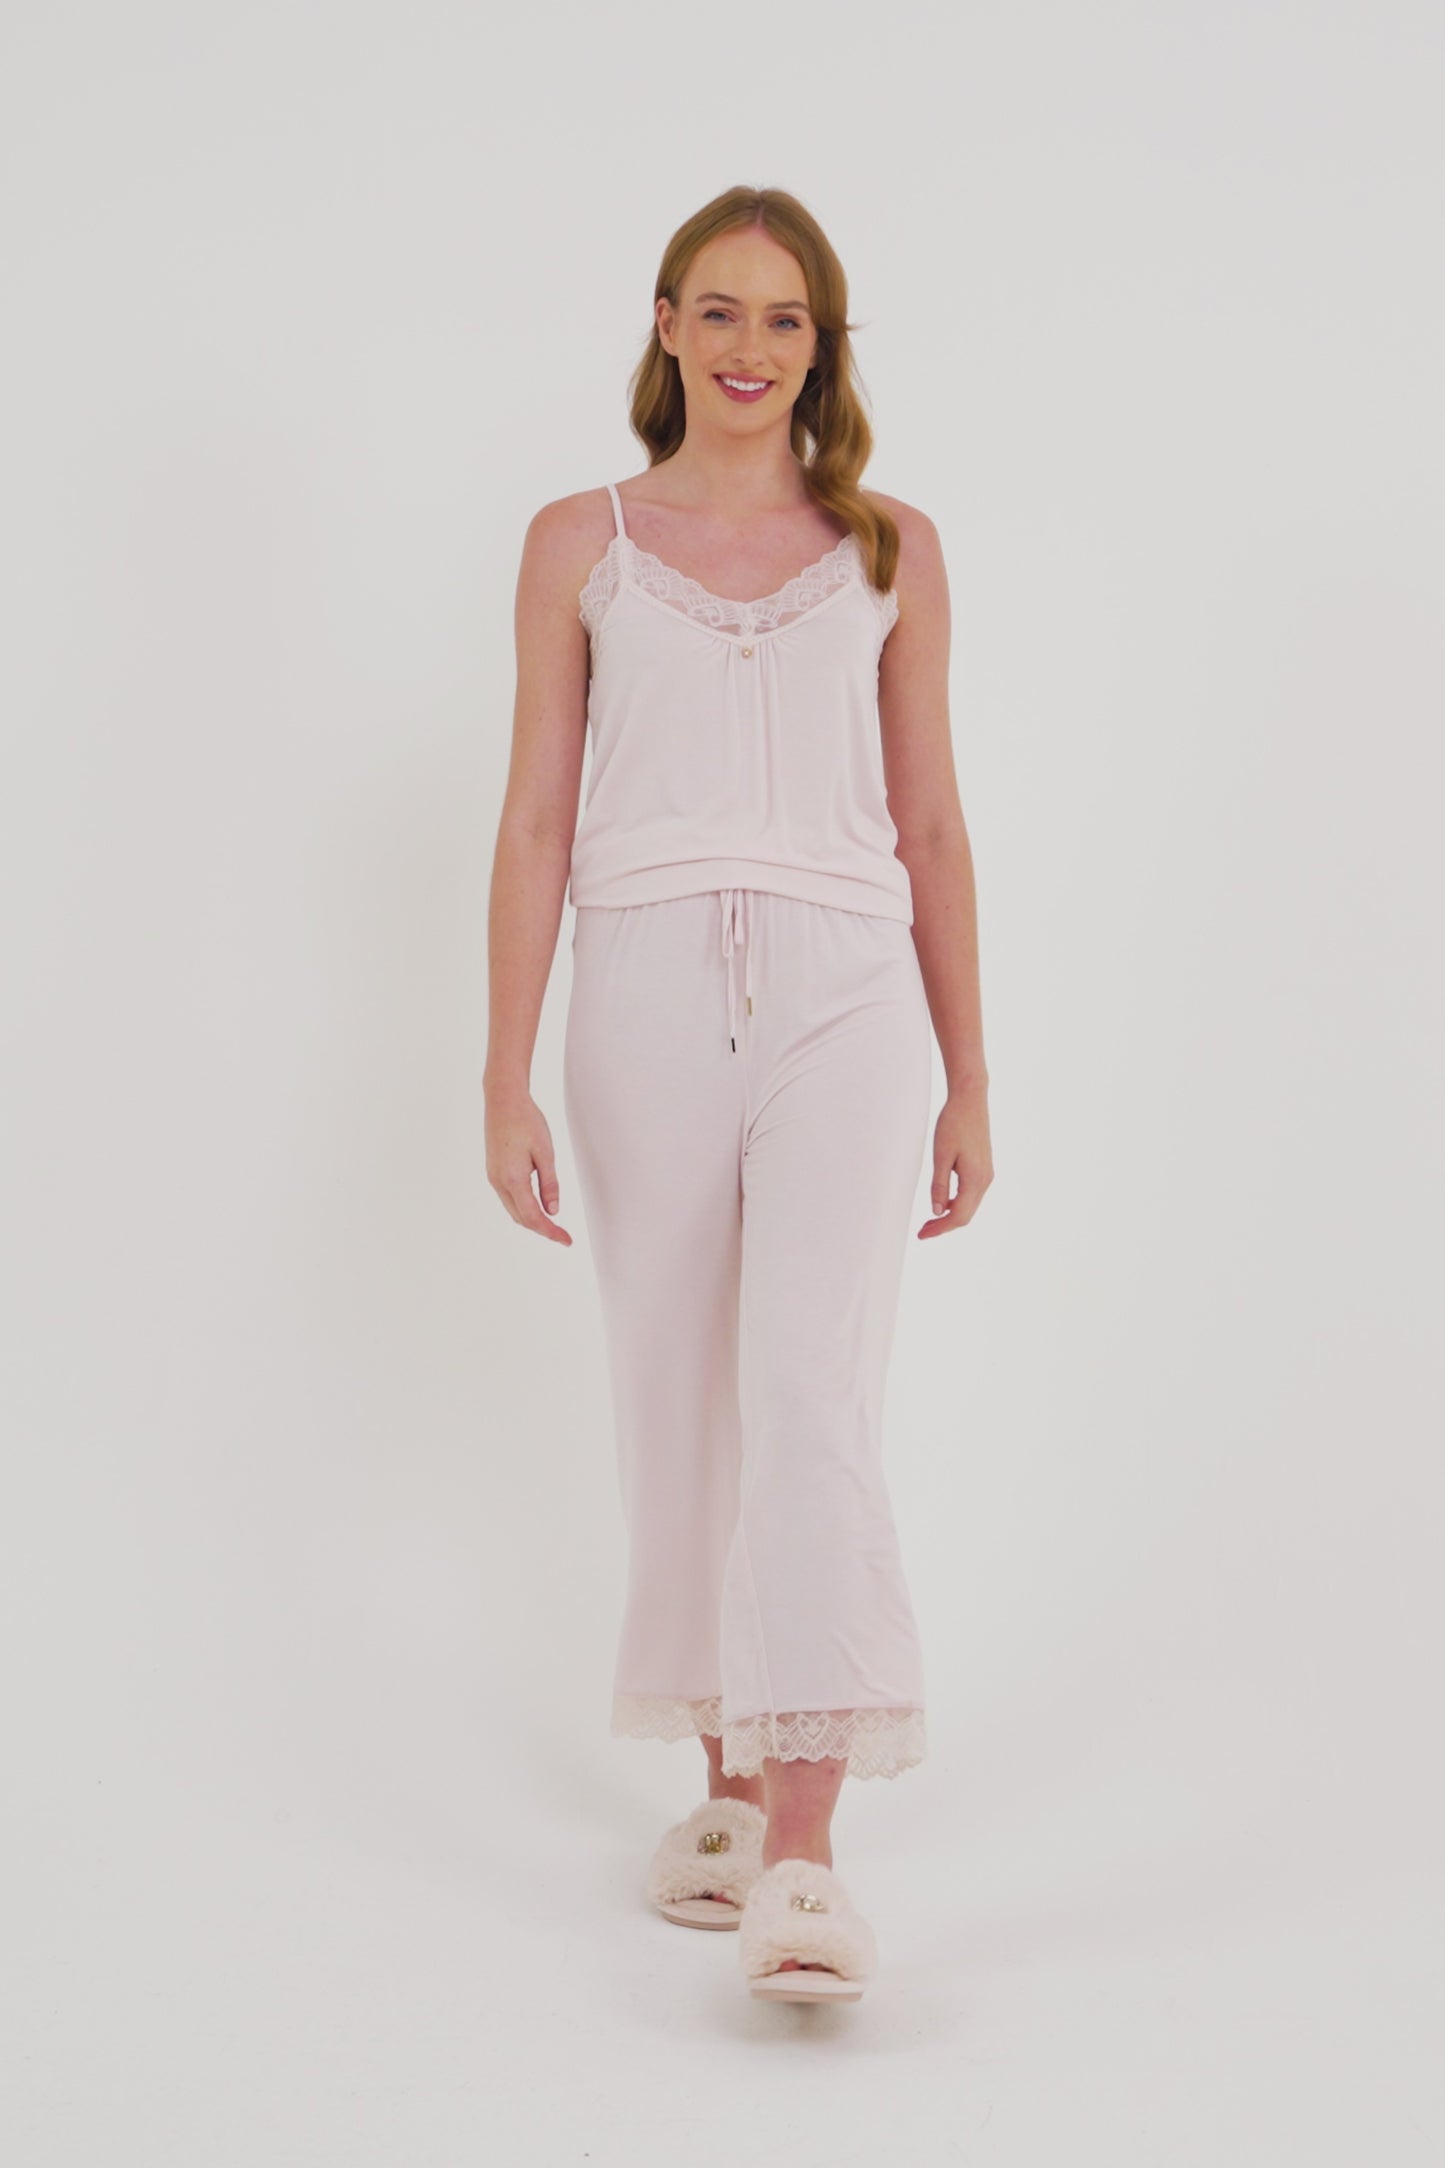 Bamboo Lace Cami Cropped Trouser Pajama Set in Powder Puff